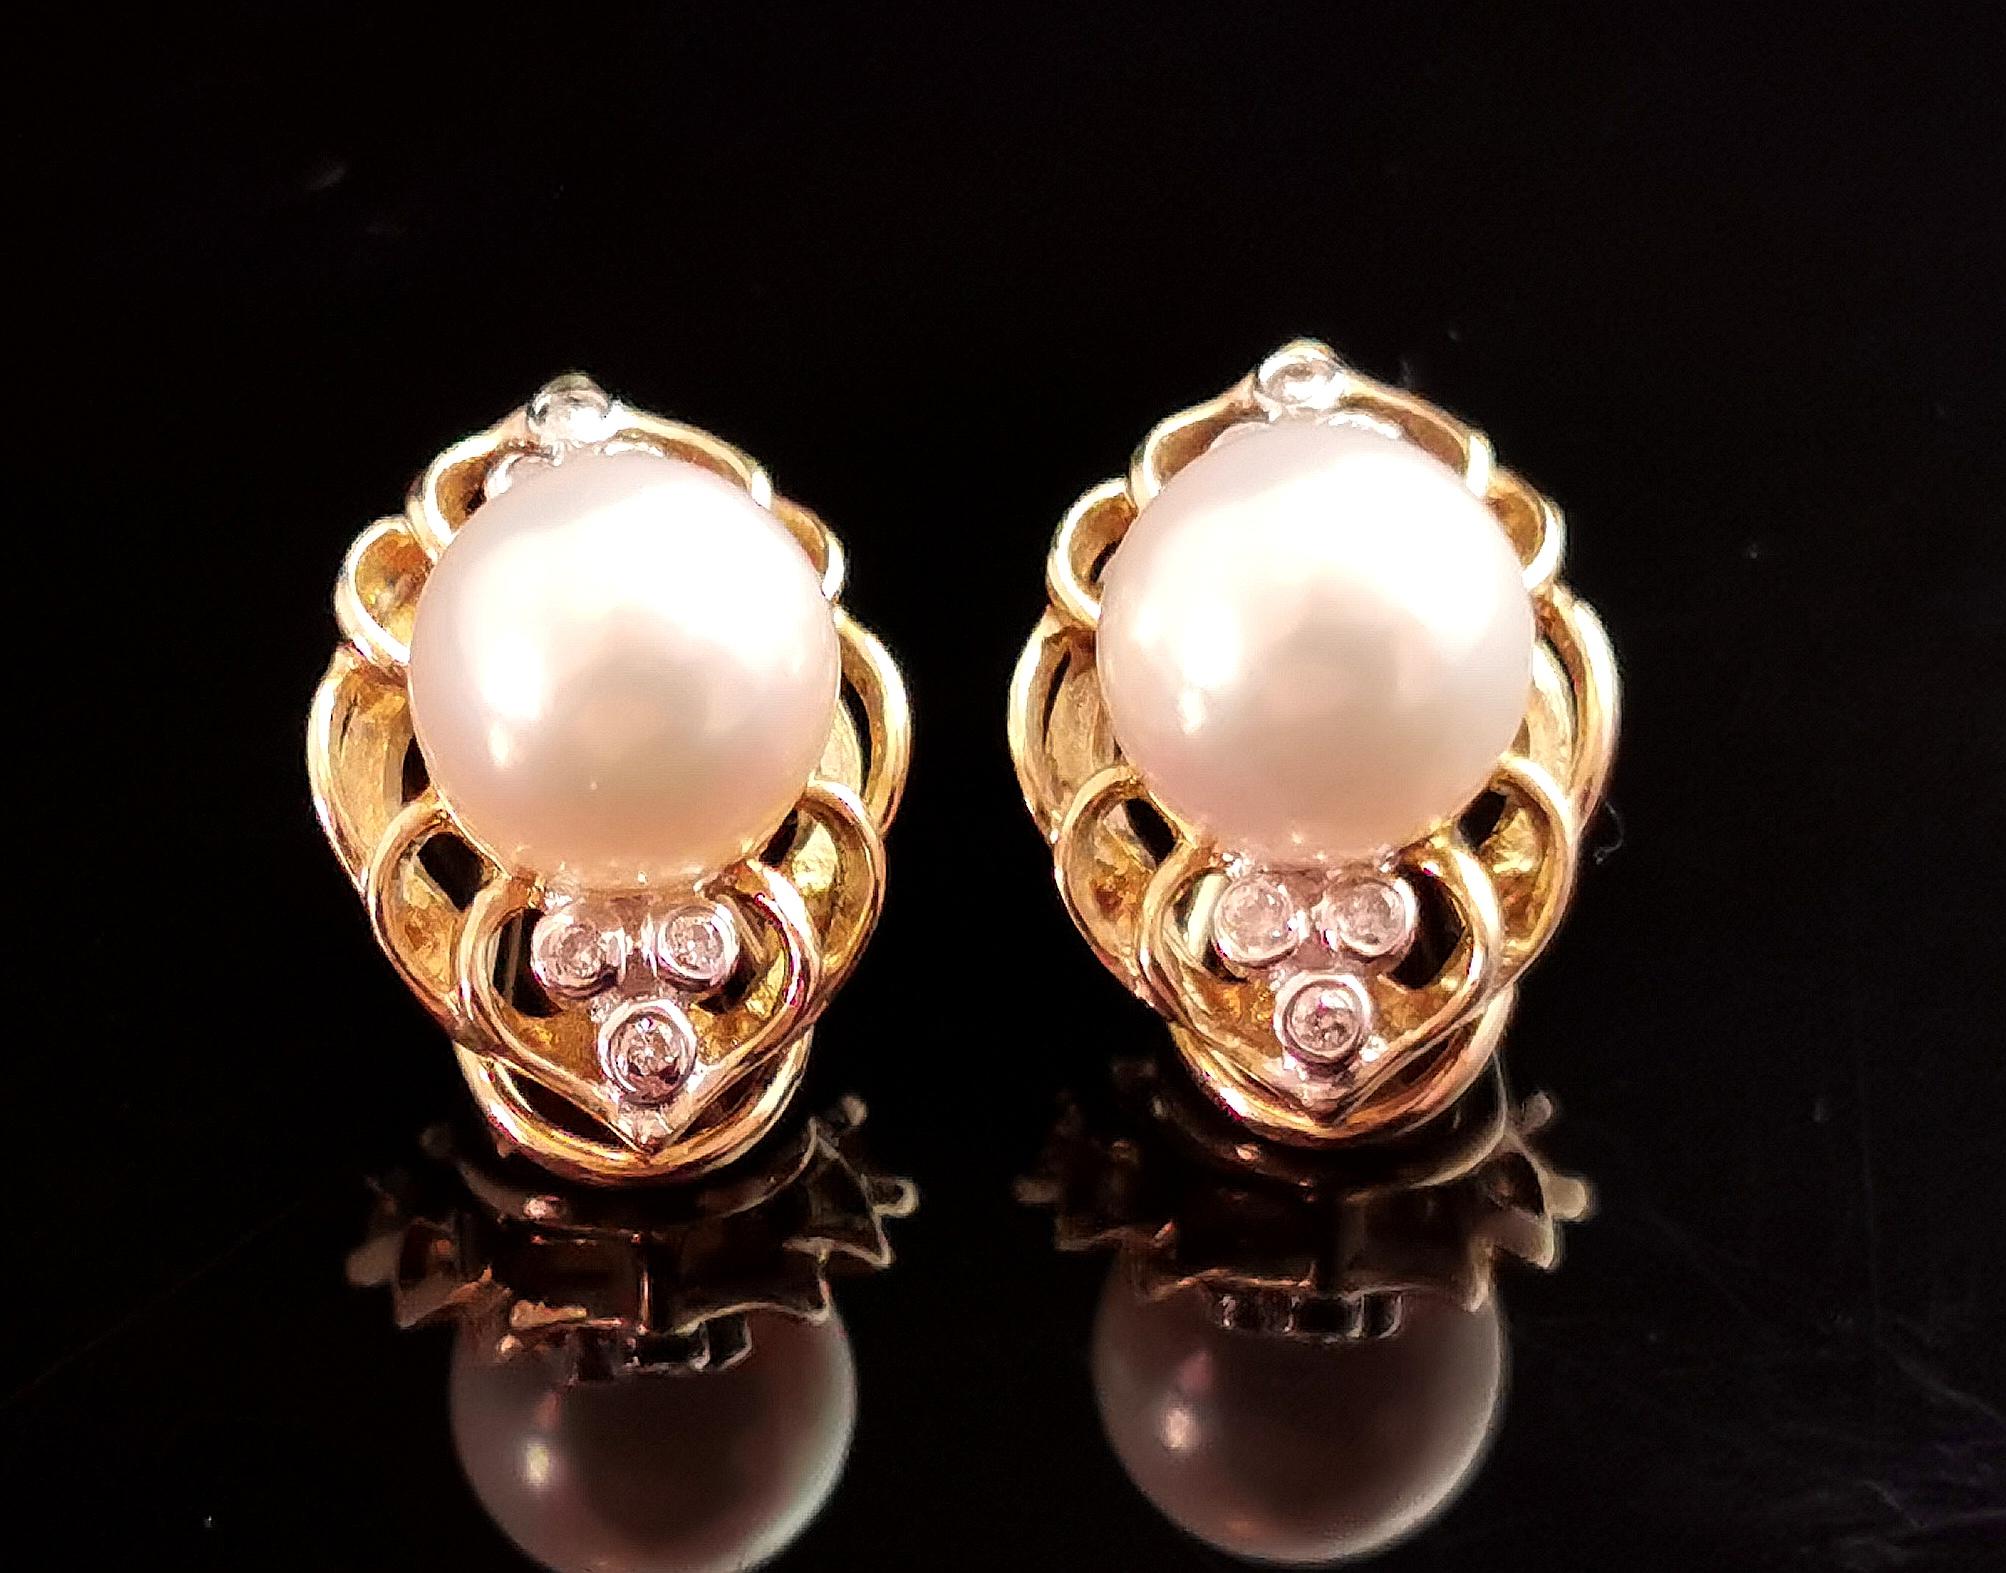 A gorgeous pair of vintage c1960s Cultured pearl and diamond earrings.

Crafted in rich 9ct yellow gold the earrings are a clip on style with gold ear clips, the centre set with a creamy and lustrous cultured pearl.

Surrounding the pearl there are